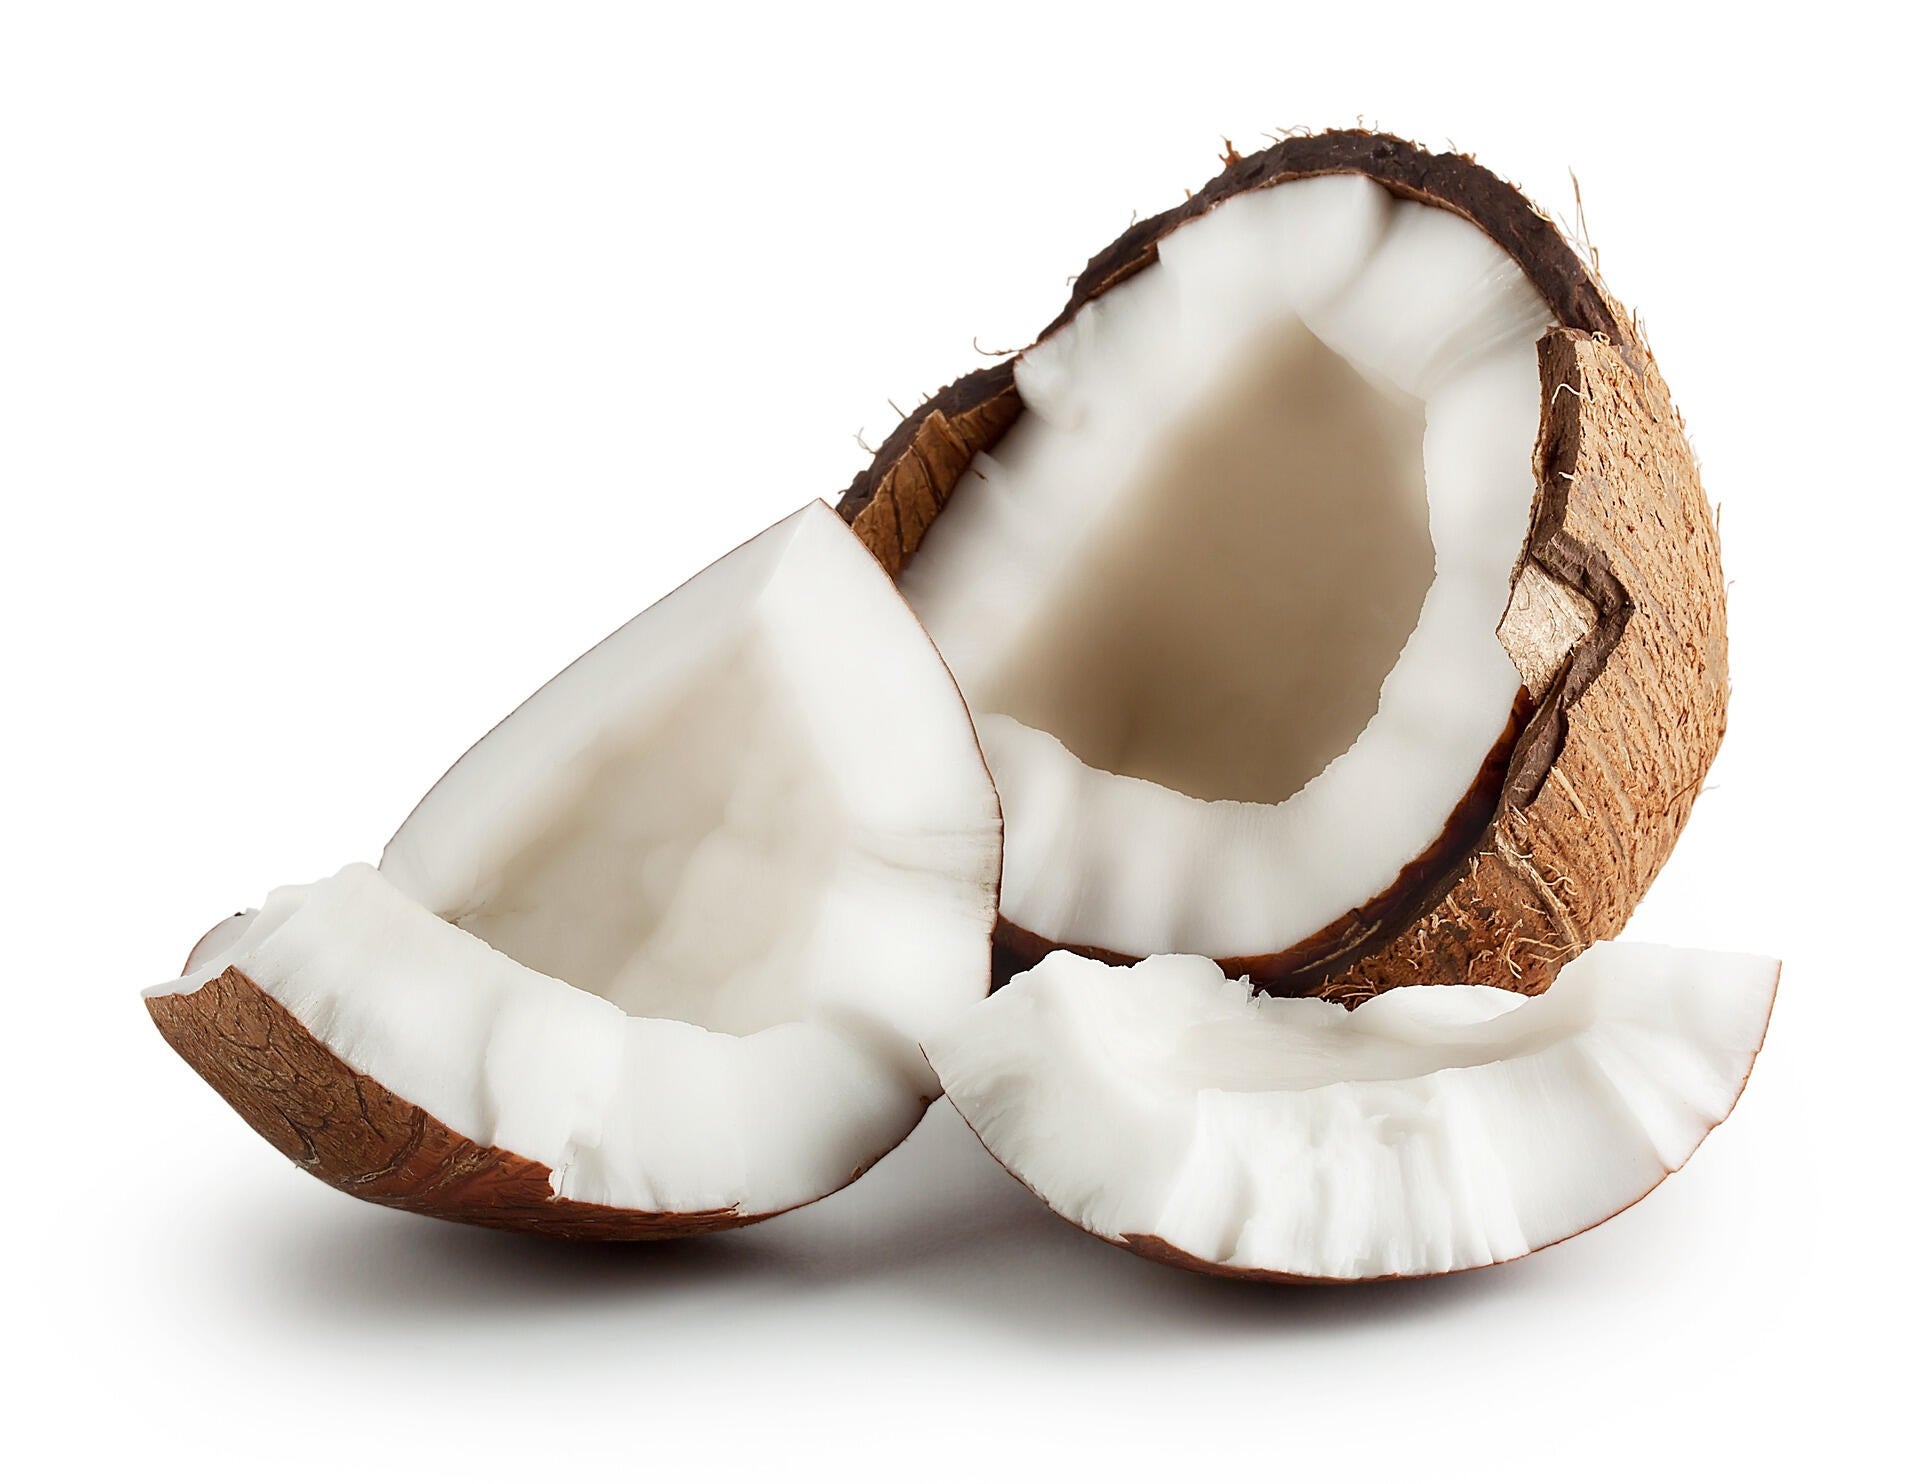 Coconut (Fractionated) Pure Oil 50ml